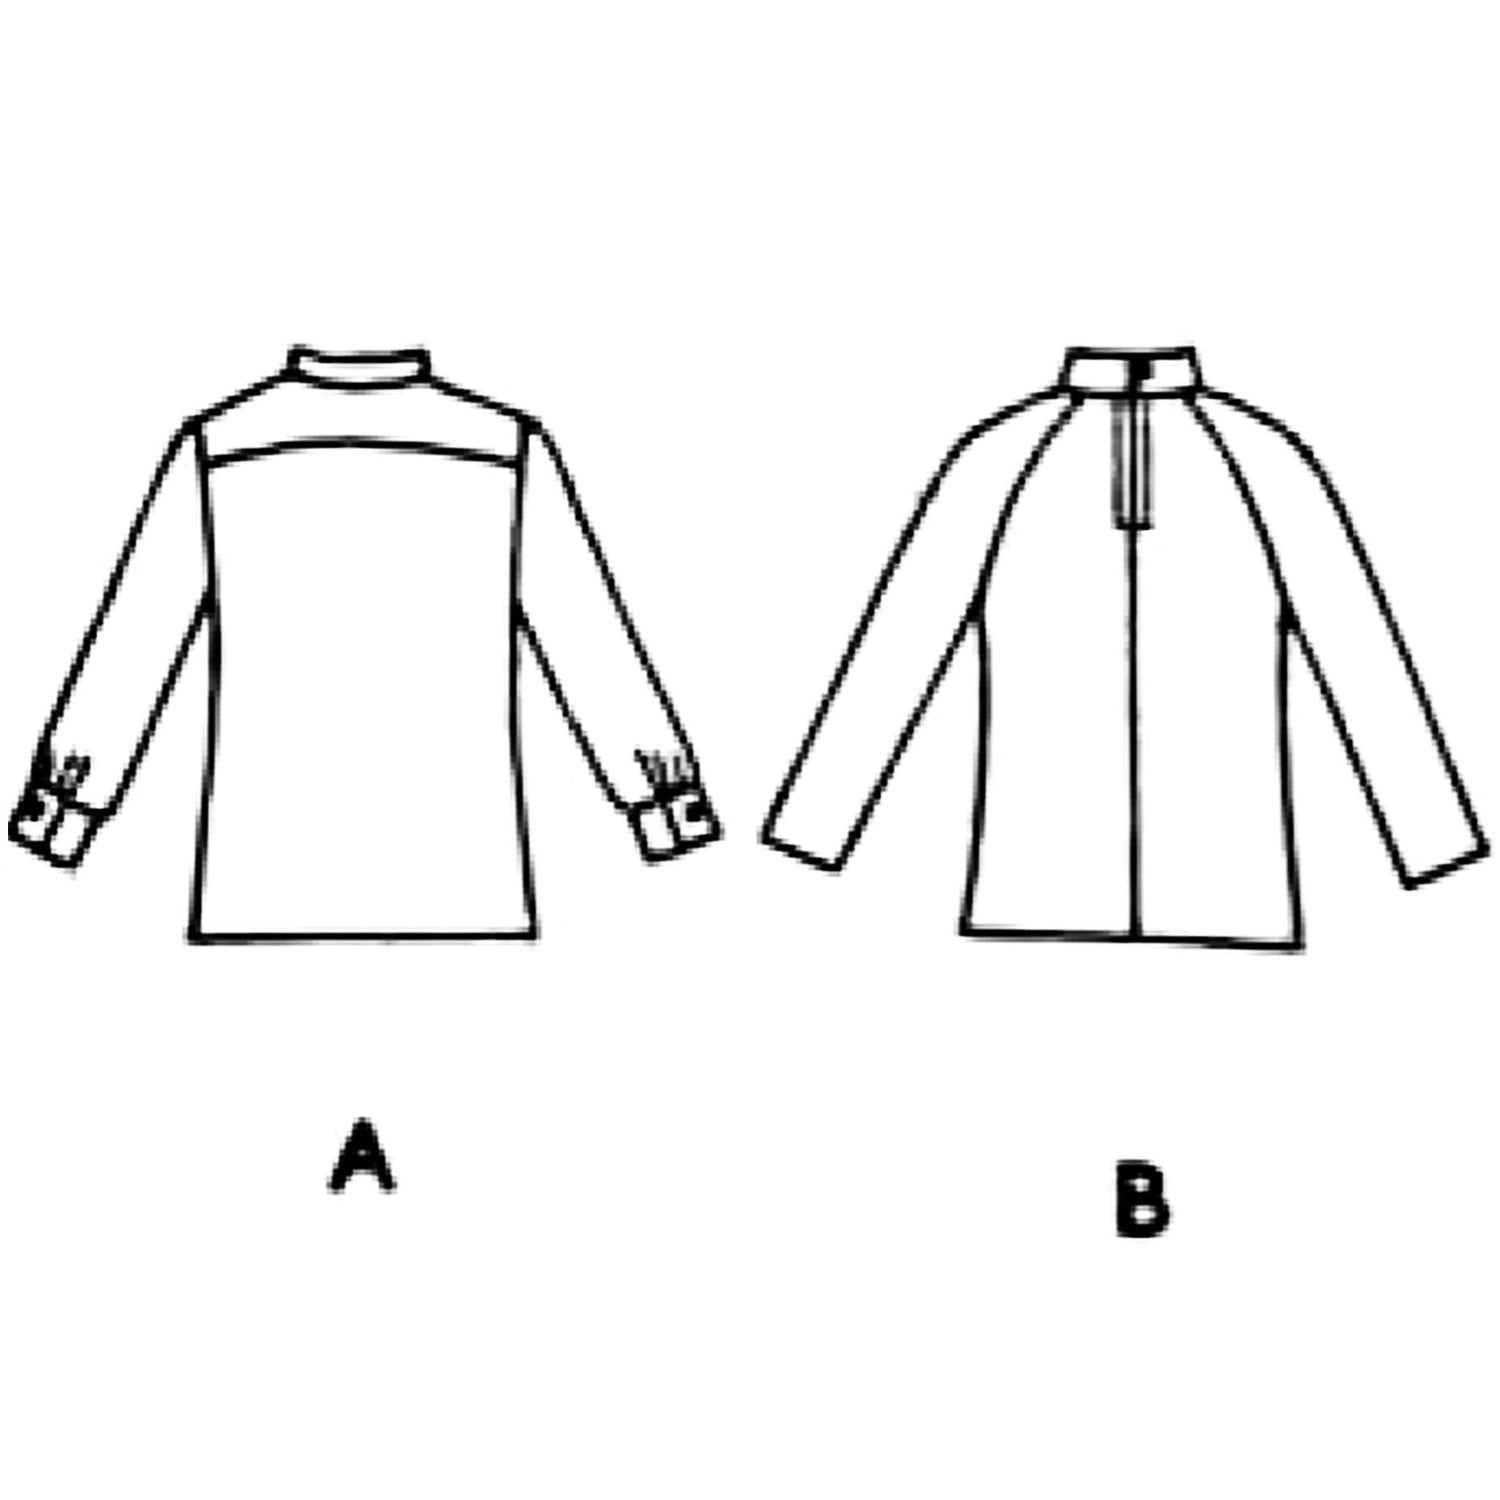 Line drawing of back views